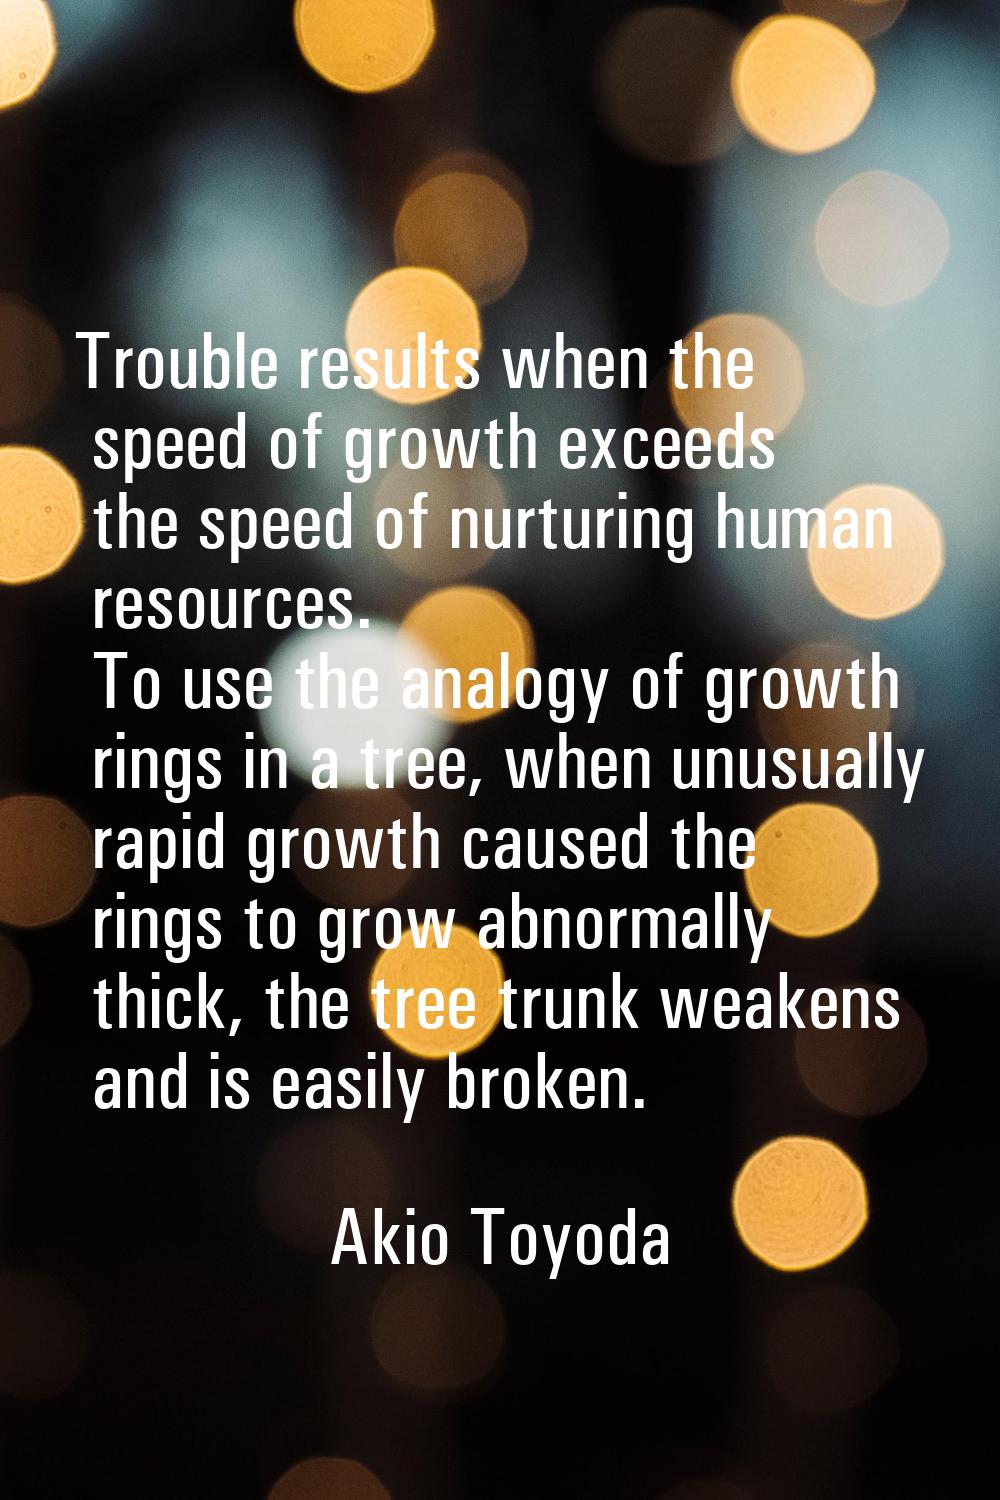 Trouble results when the speed of growth exceeds the speed of nurturing human resources. To use the